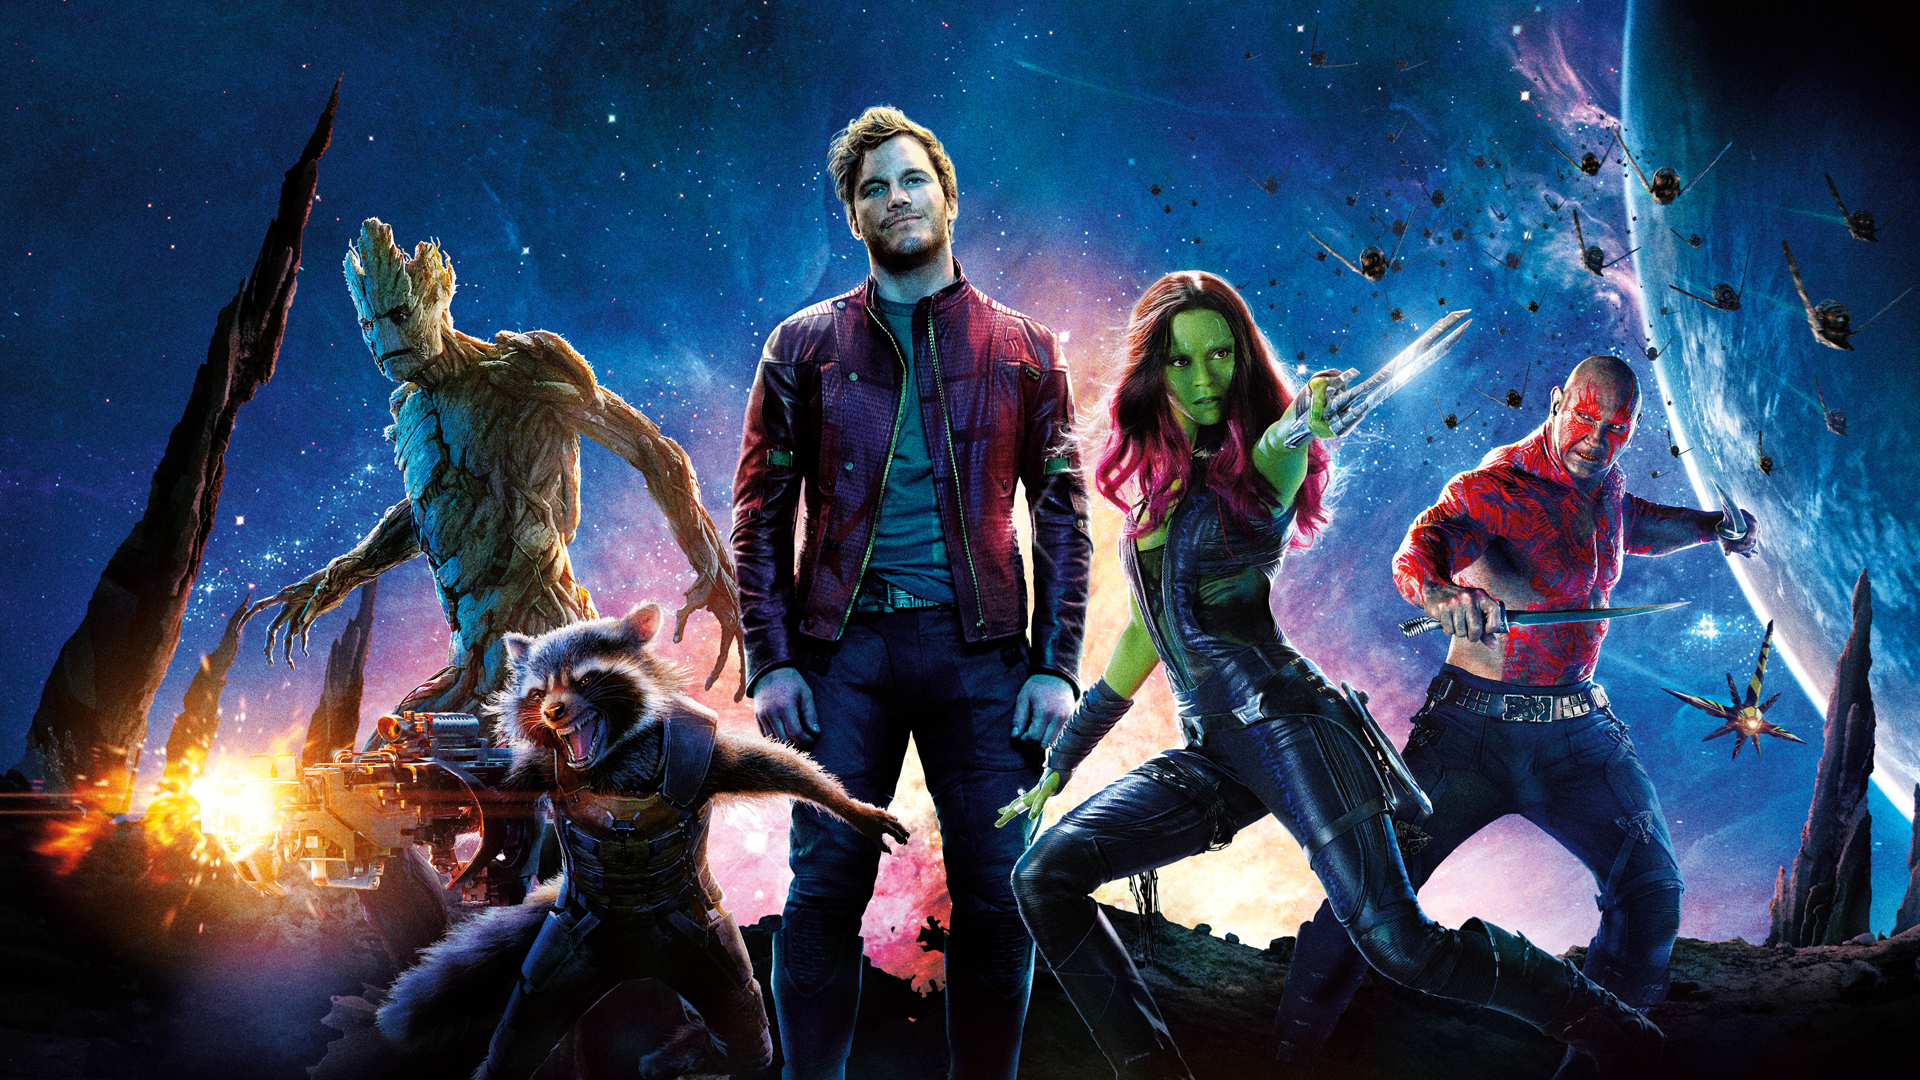 Guardians Of The Galaxy Wallpapers